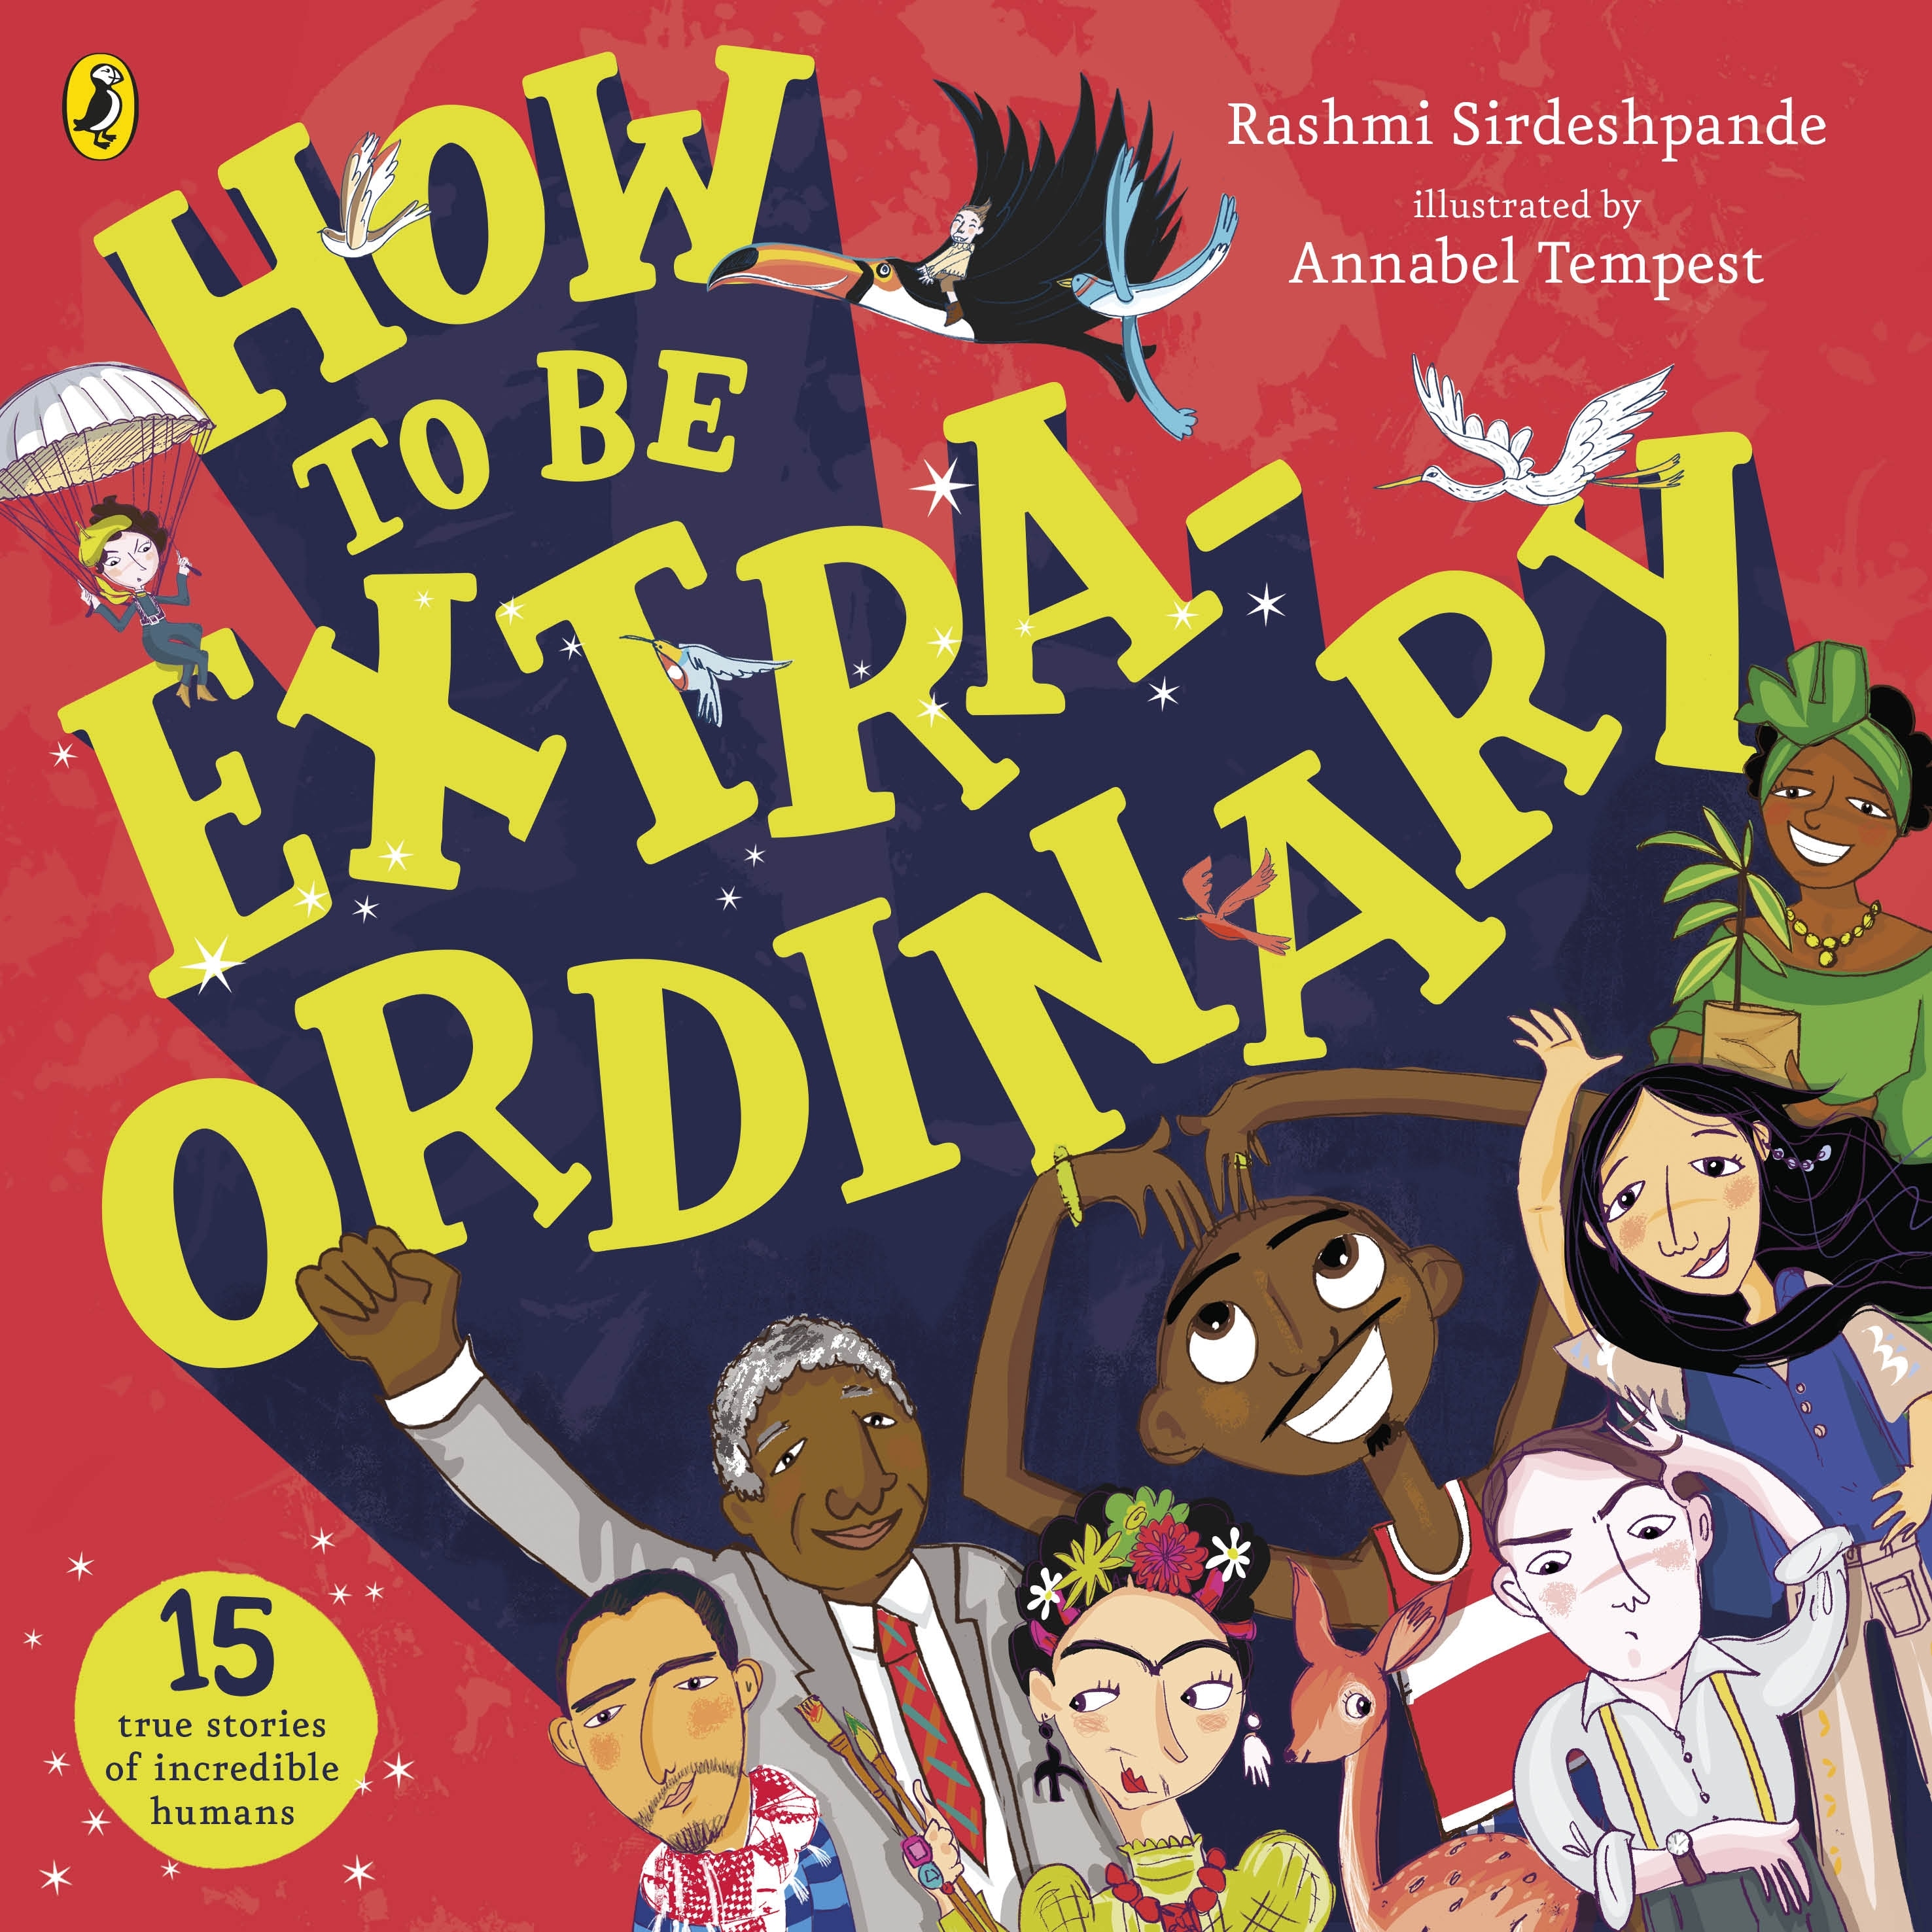 Book “How To Be Extraordinary” by Rashmi Sirdeshpande, Annabel Tempest — August 1, 2019